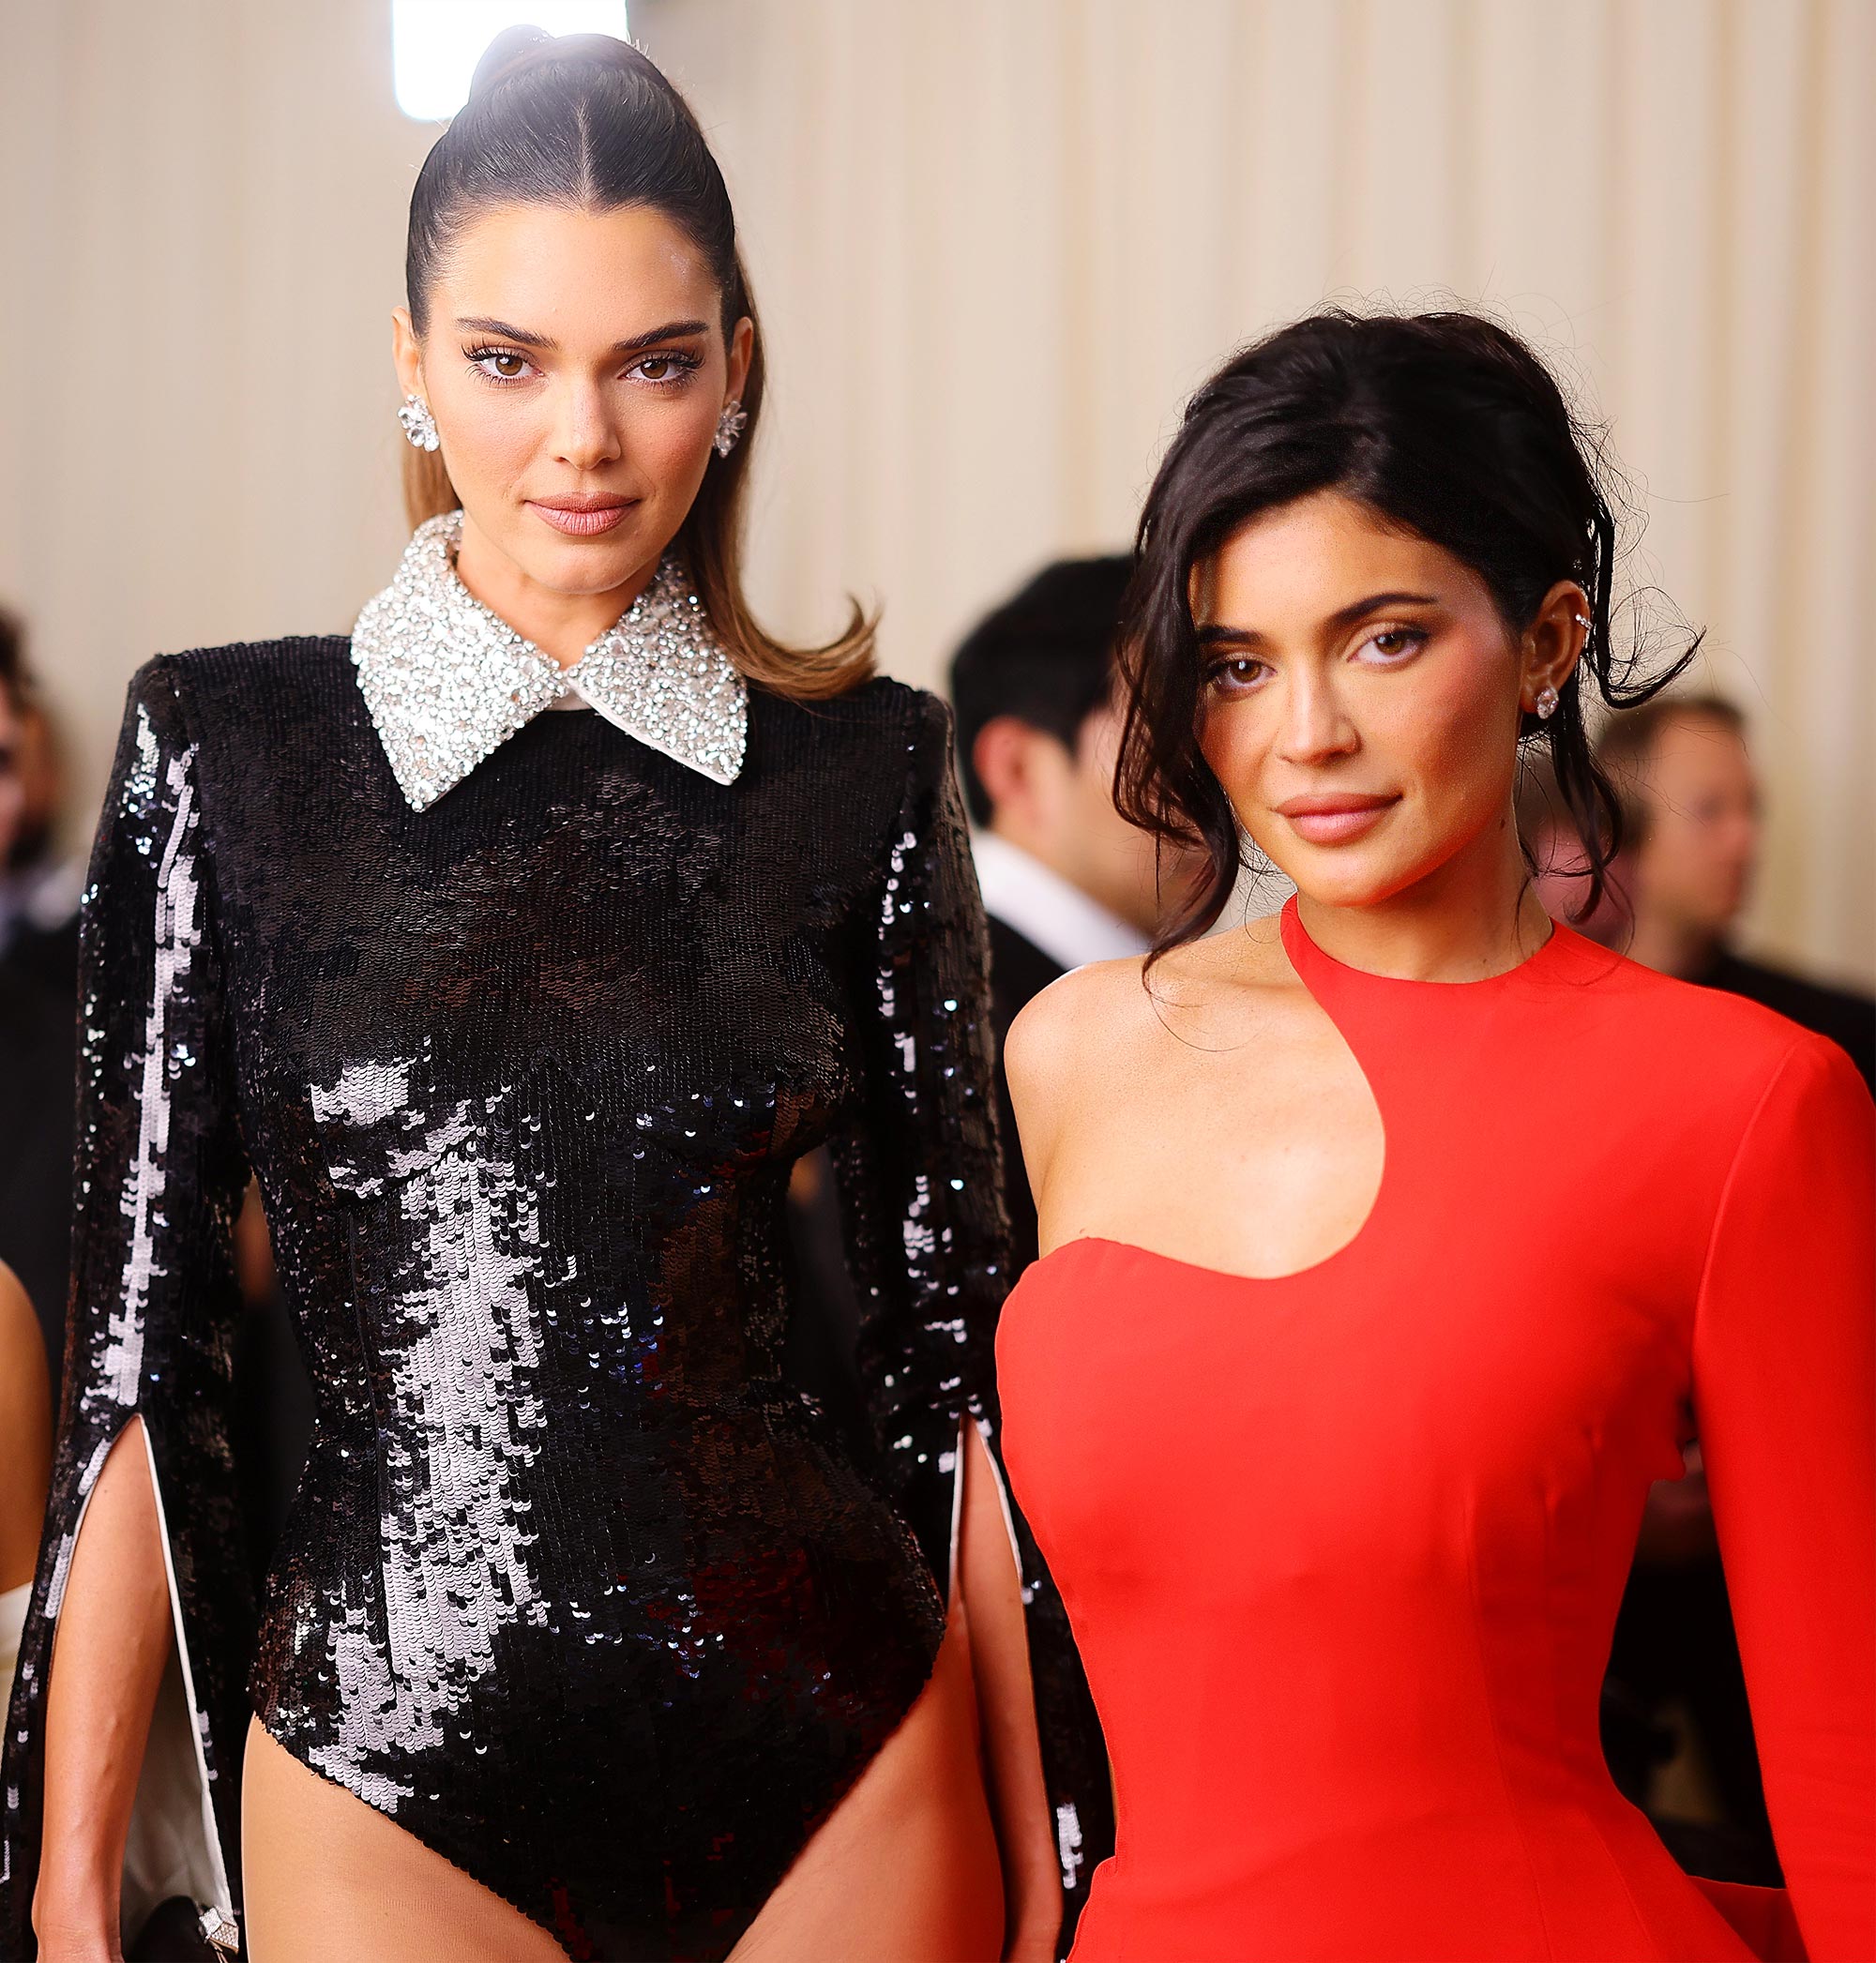 Kendall and Kylie Jenner Compare Their Styles Via Photos